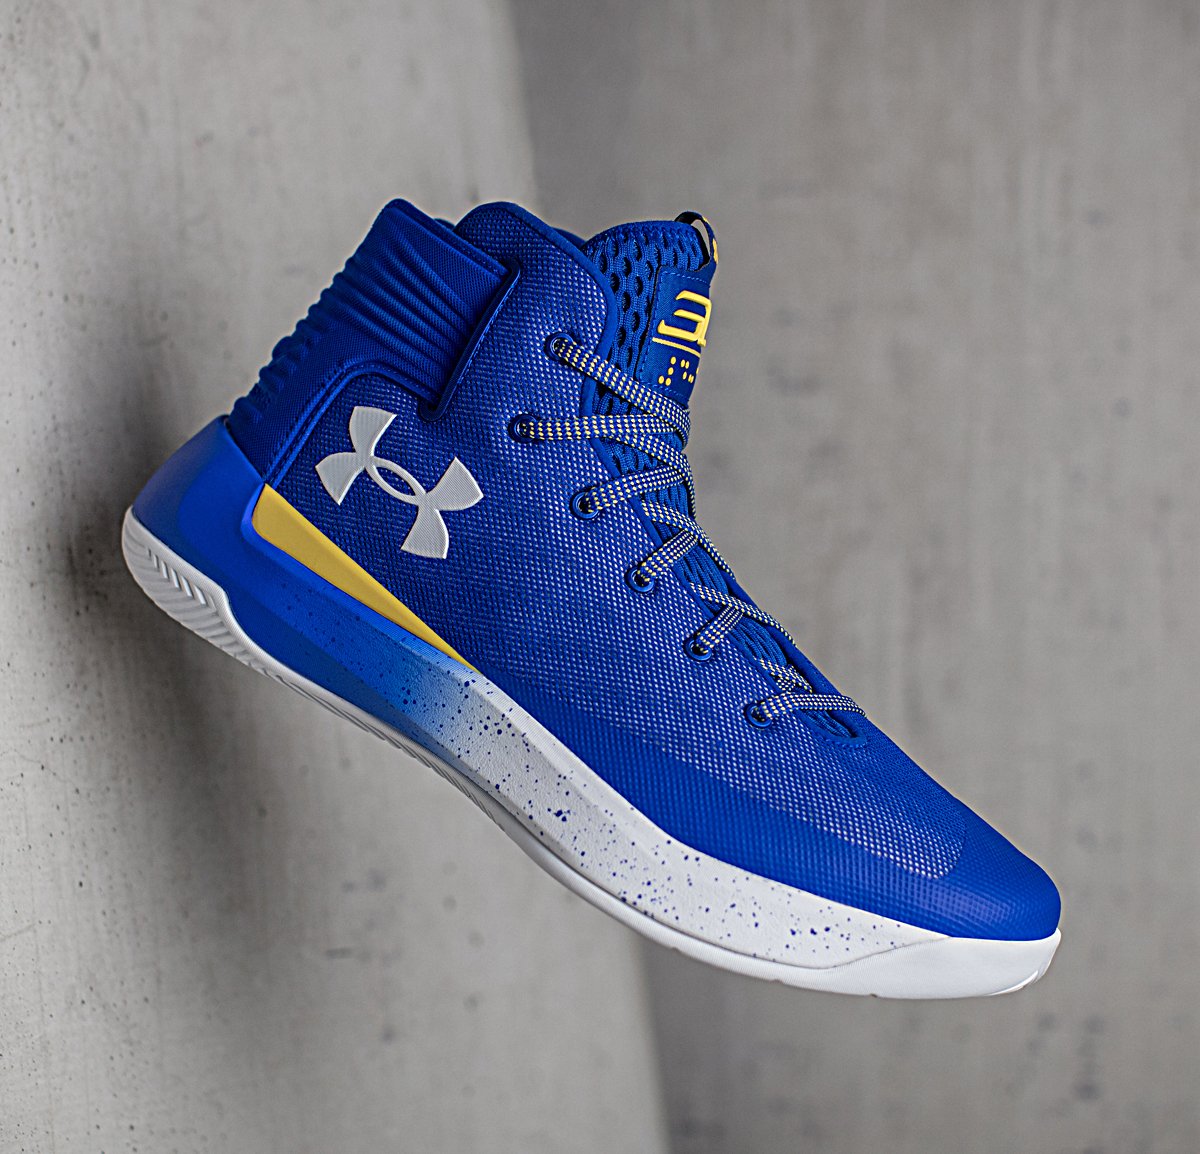 Just The Facts // Inside Stephen Curry's Under Armour Curry 3Zer0